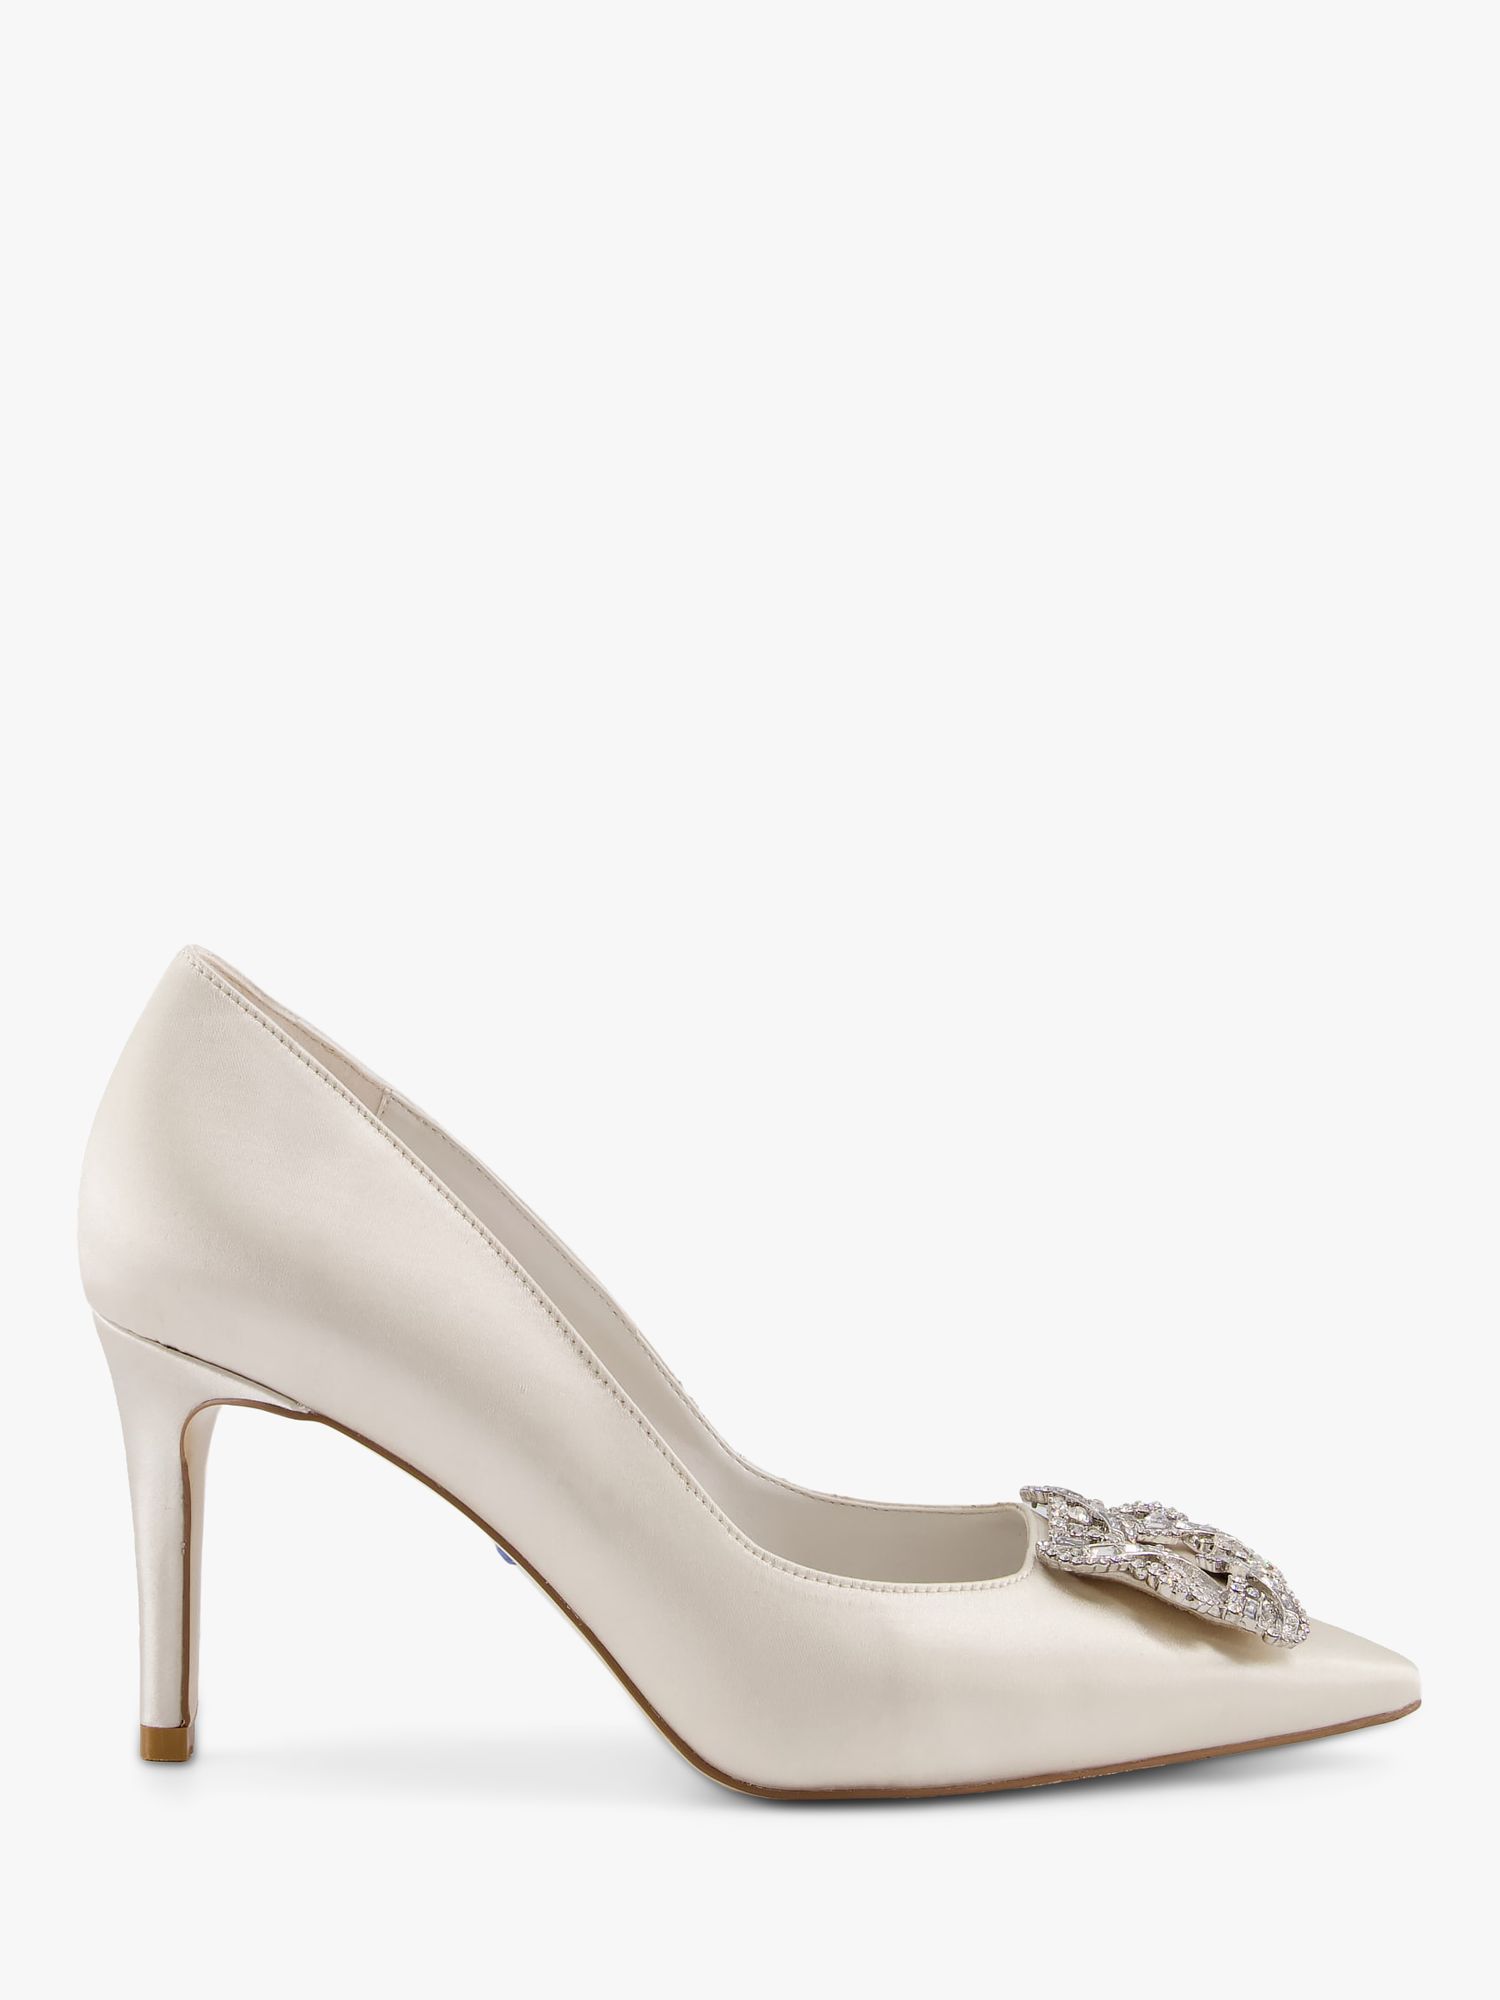 Dune Bridal Collection Bellissima Embellished Brooch Pointed Toe Court Shoes